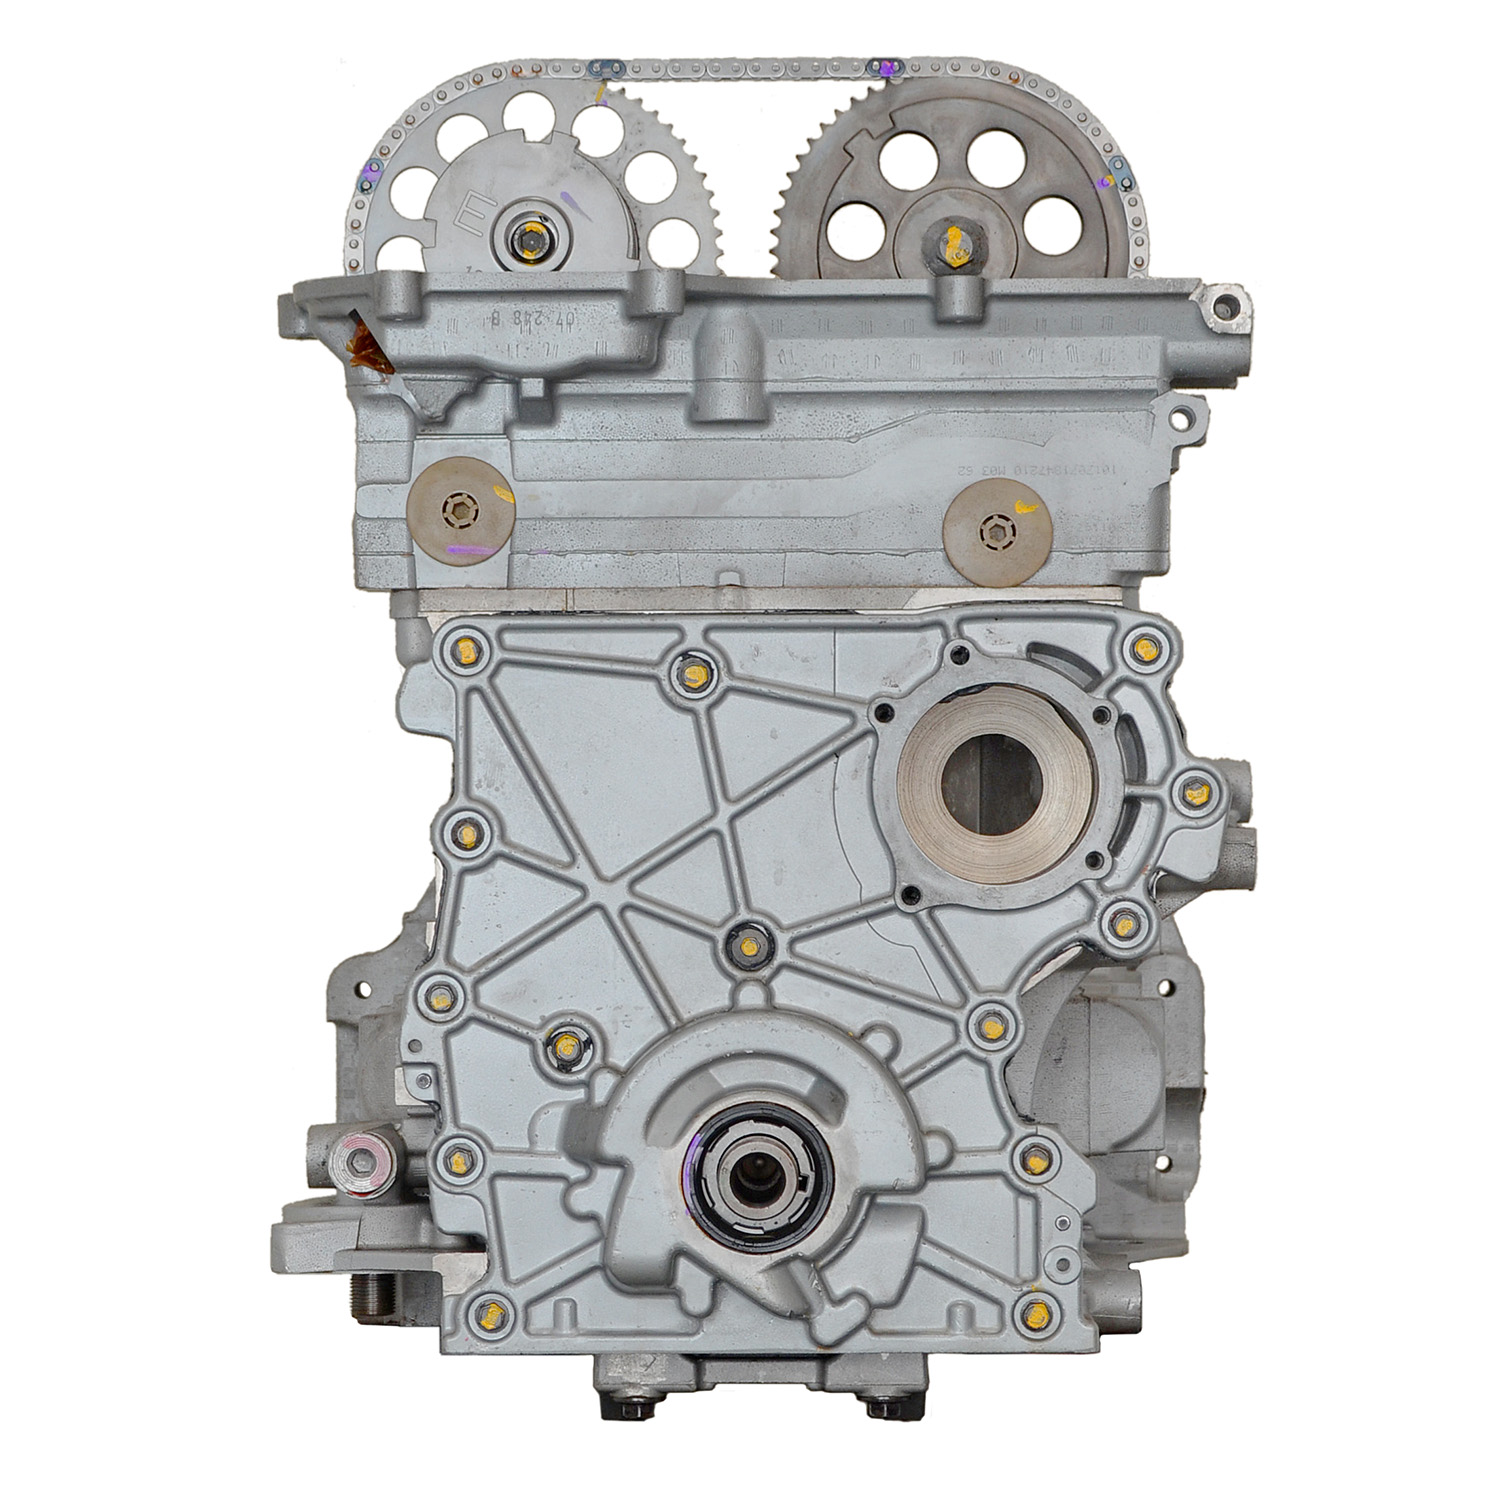 DCT30 Remanufactured Crate Engine for 2008-2012 Chevy Colorado & GMC Canyon with 2.9L L4